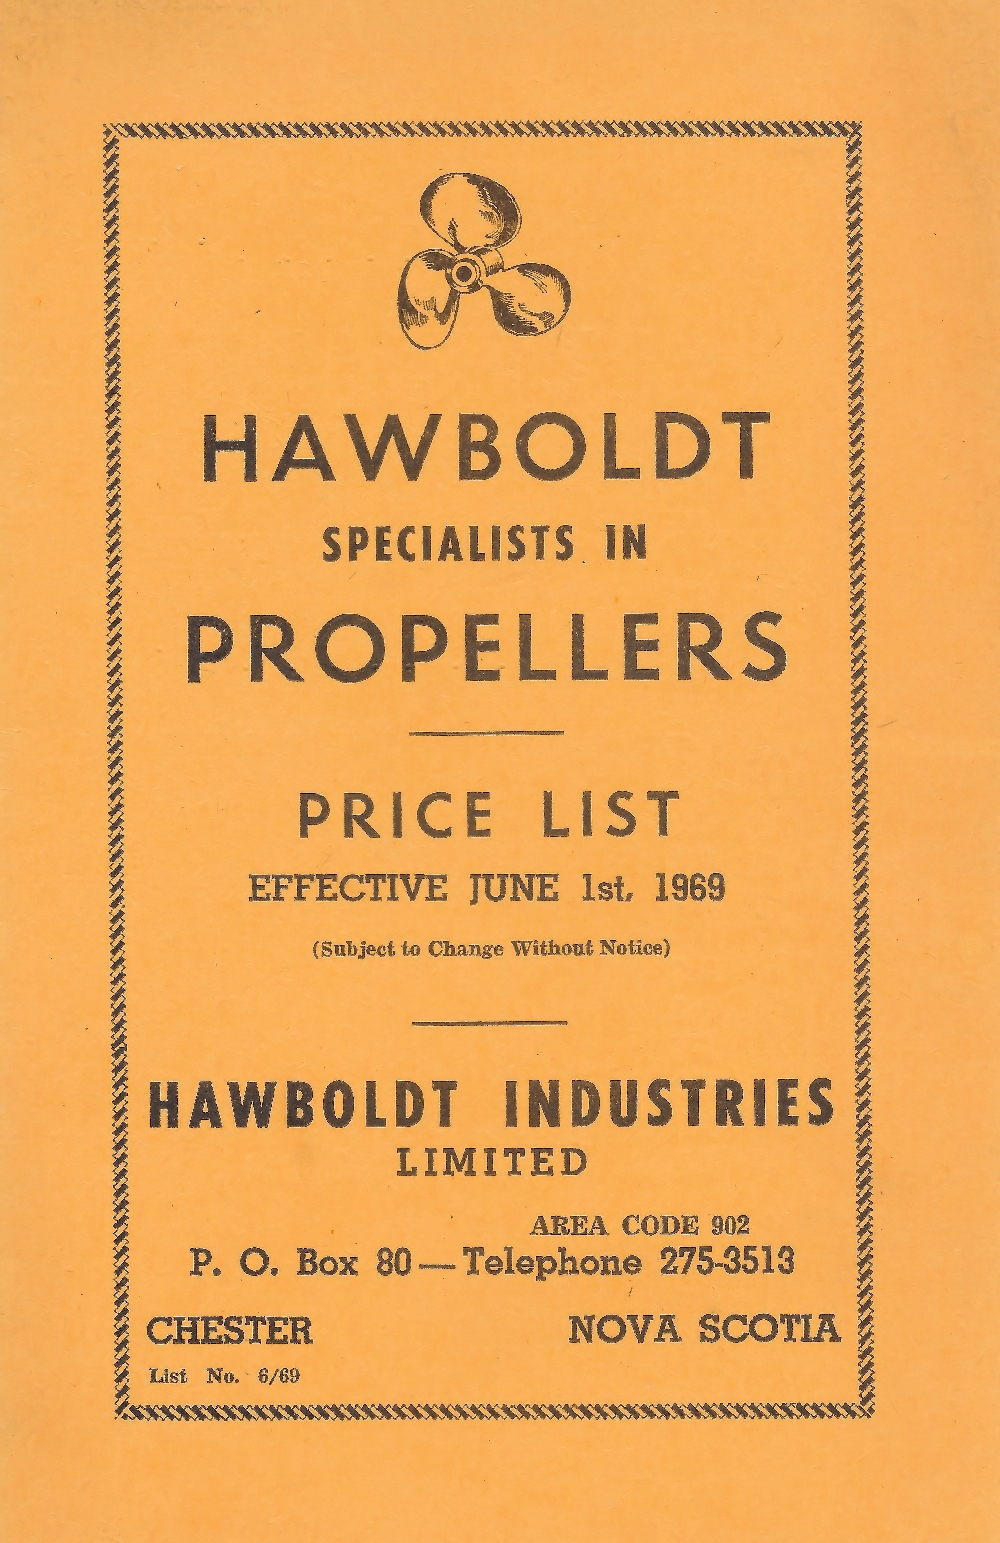 A yellow booklet cover featuring a drawing of a propeller with black printing advertising Hawboldt Industries Limited , as specialists in propellers with a price list for June 1st 1969.